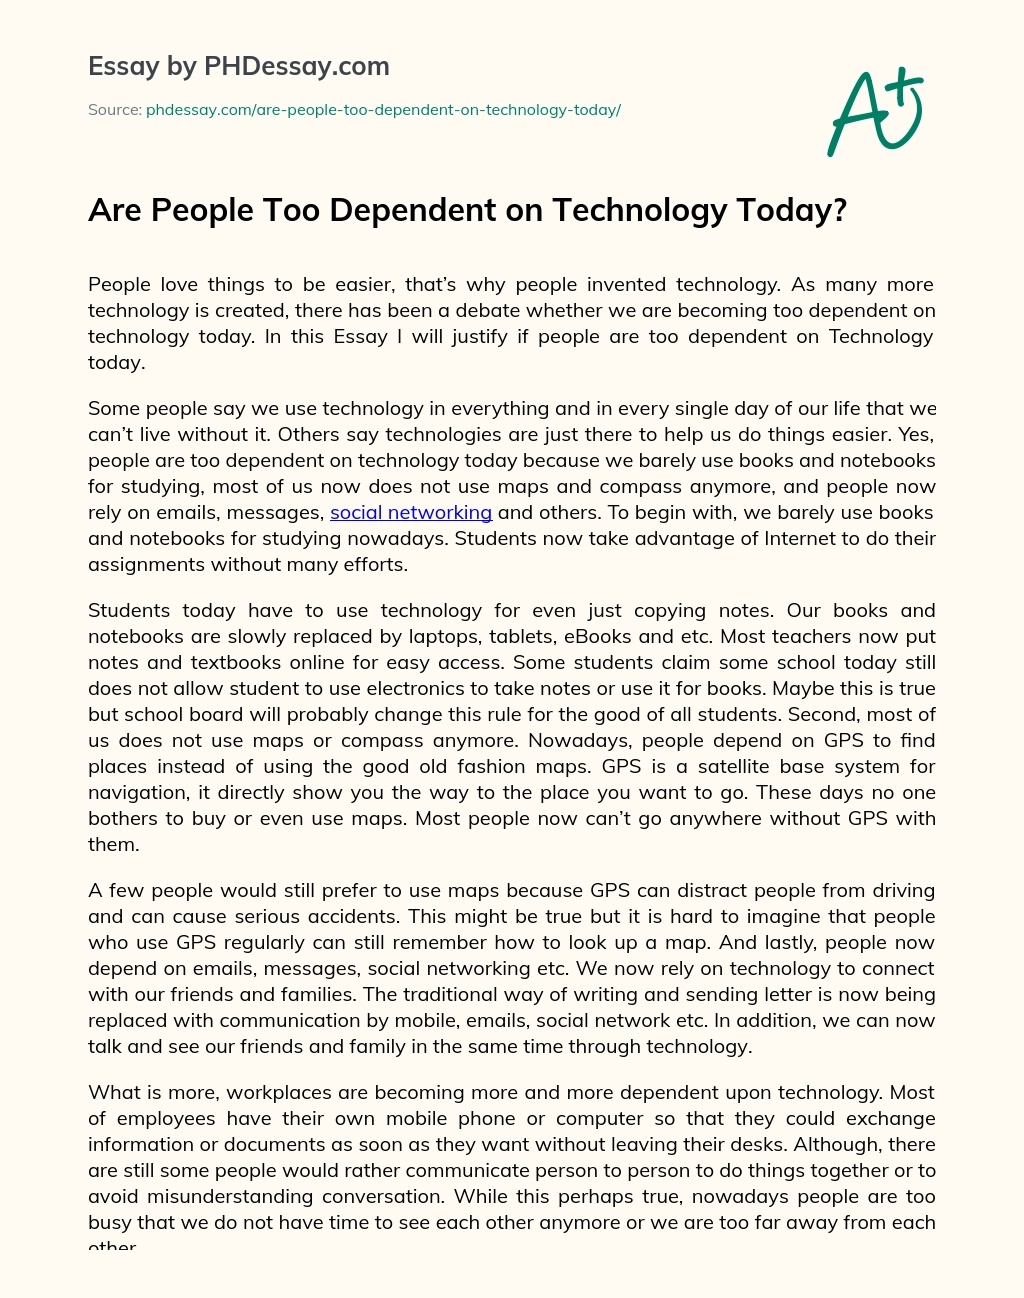 Are People Too Dependent on Technology Today? essay